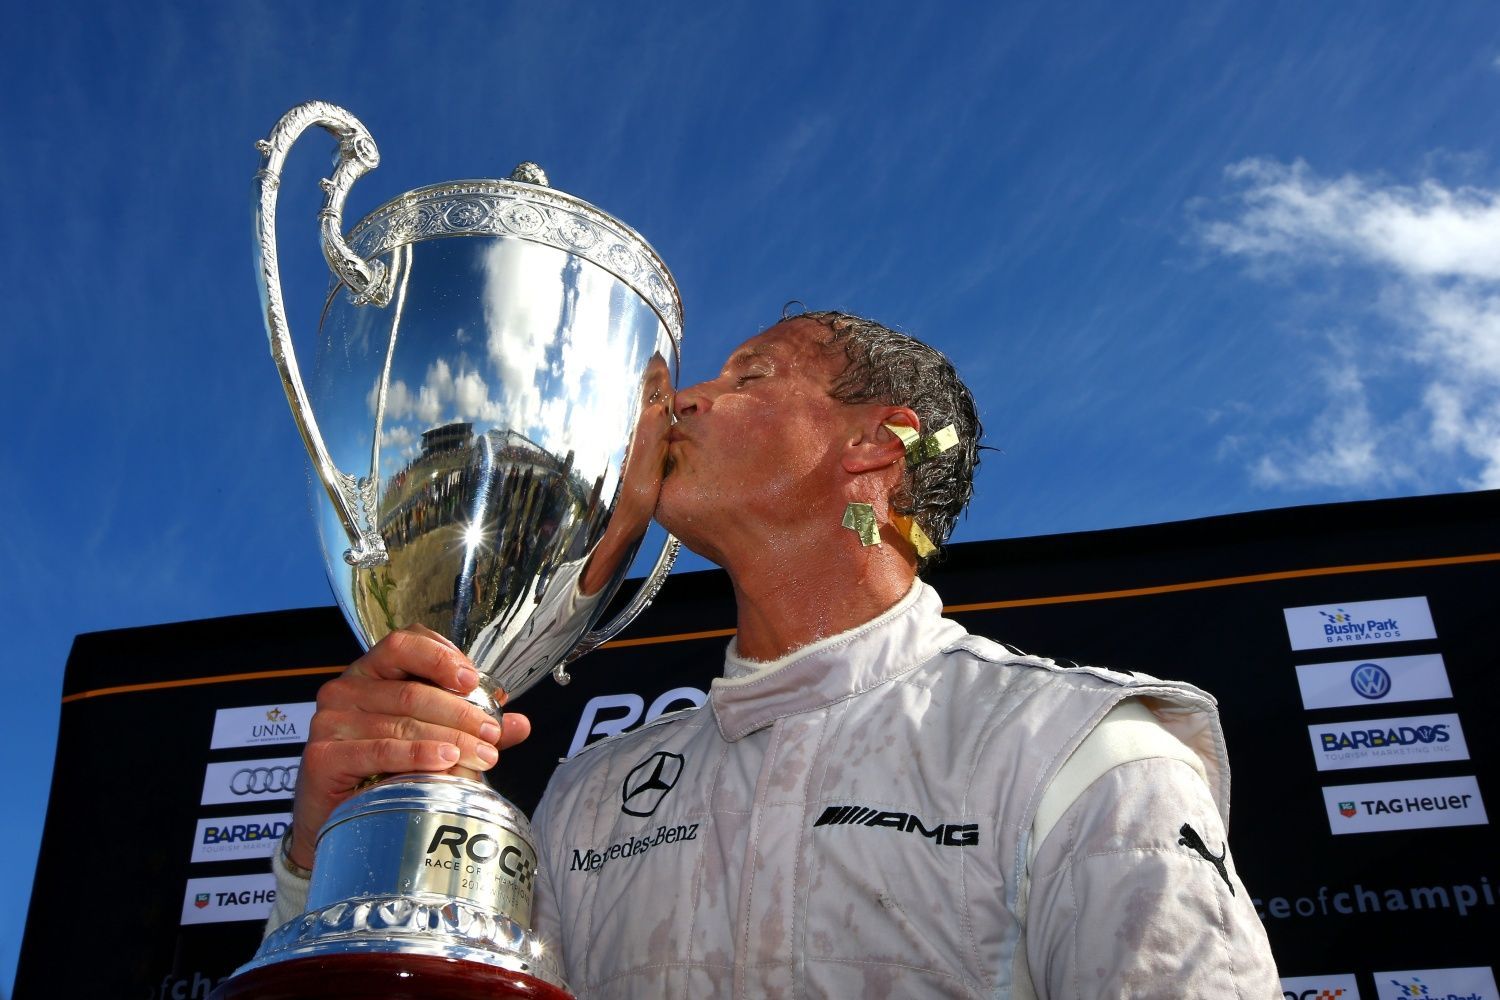 Race of Champions 2014: David Coulthard